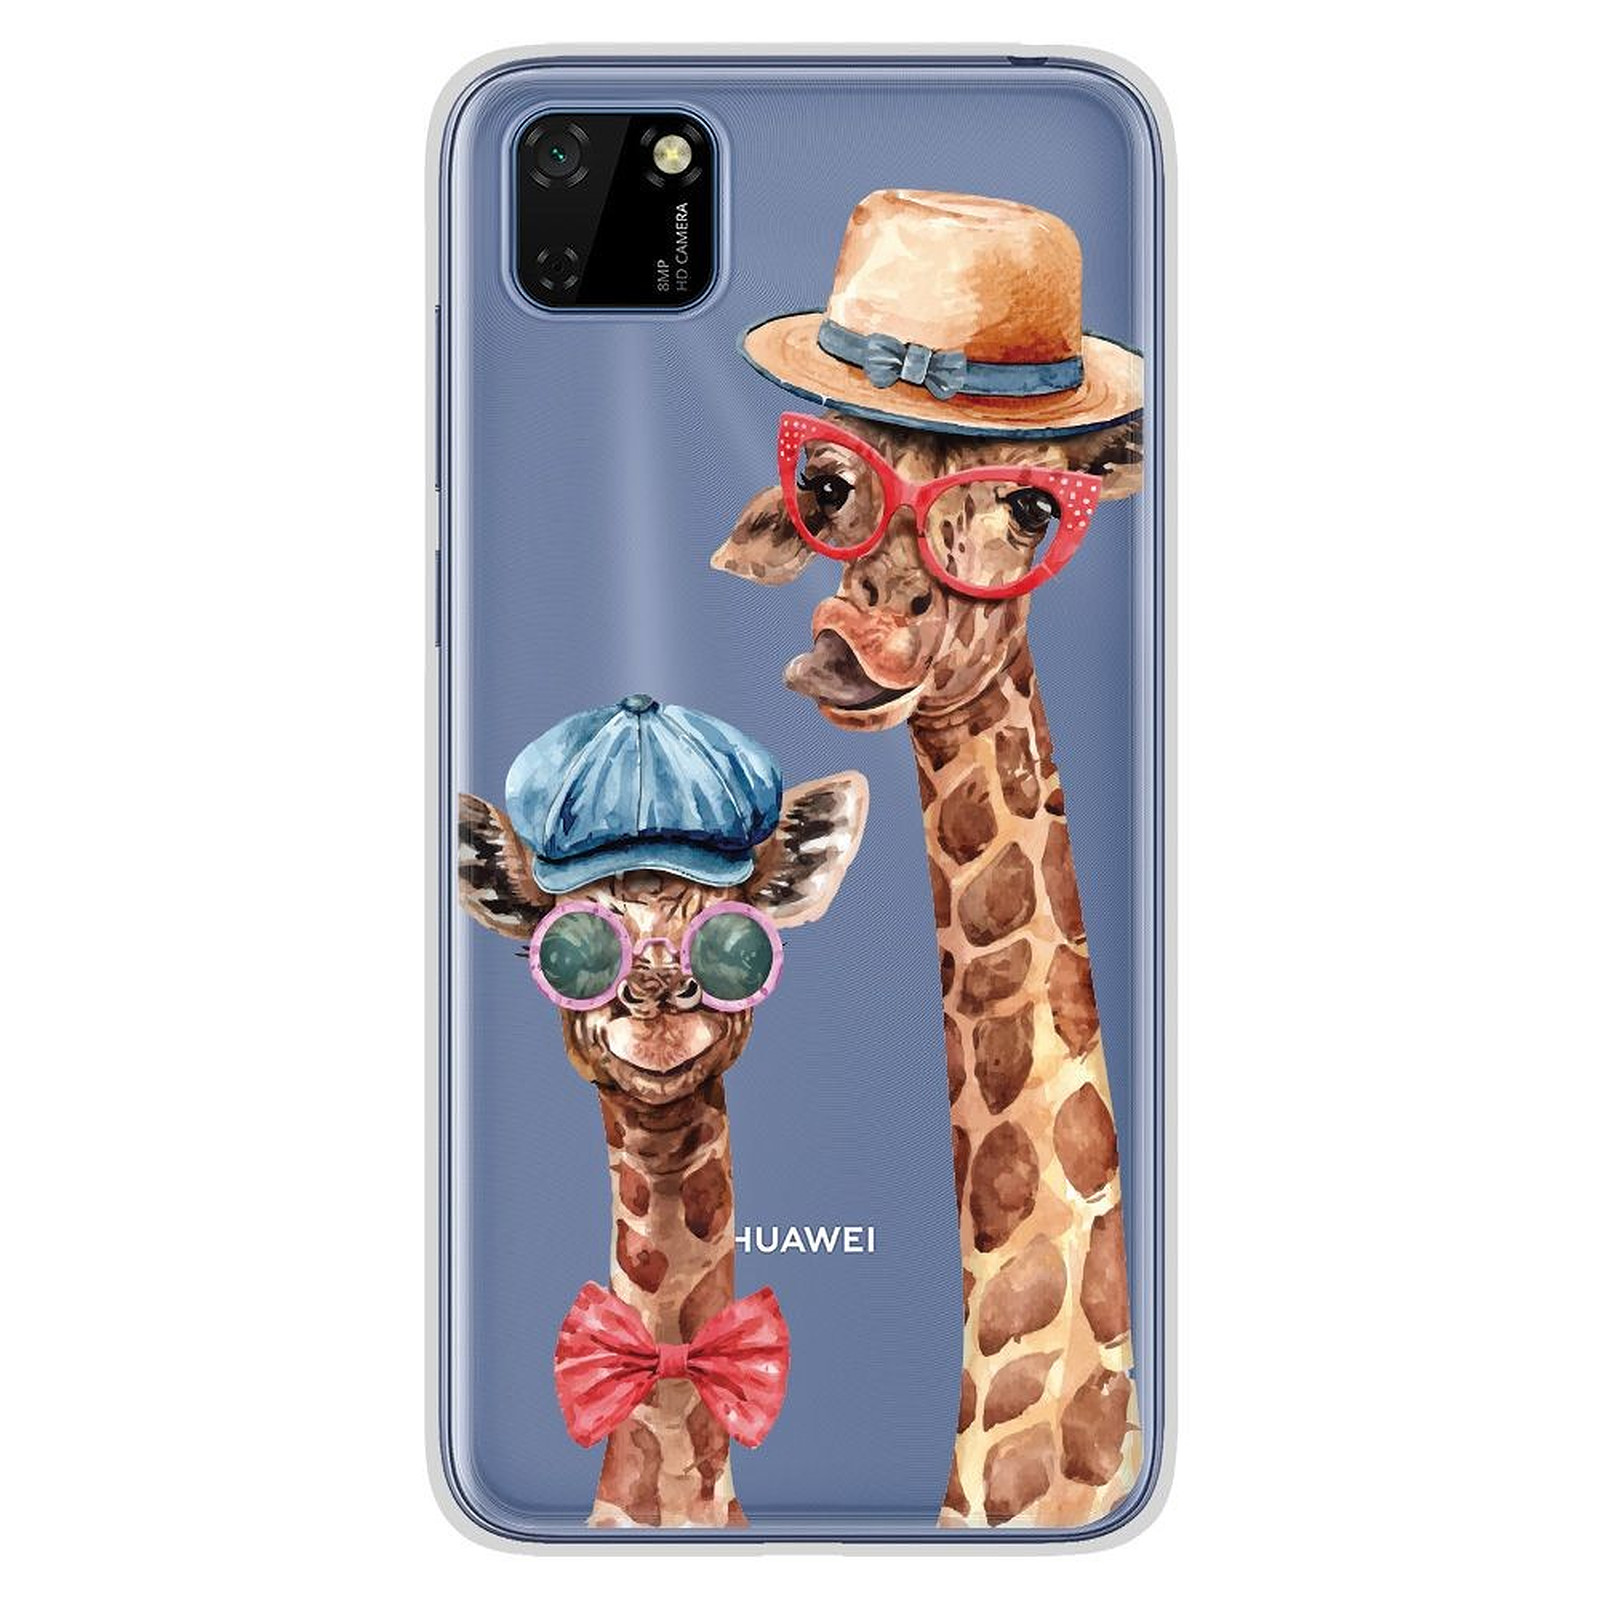 1001 Coques Coque silicone gel Huawei Y5P motif Funny Girafe - Coque telephone 1001Coques